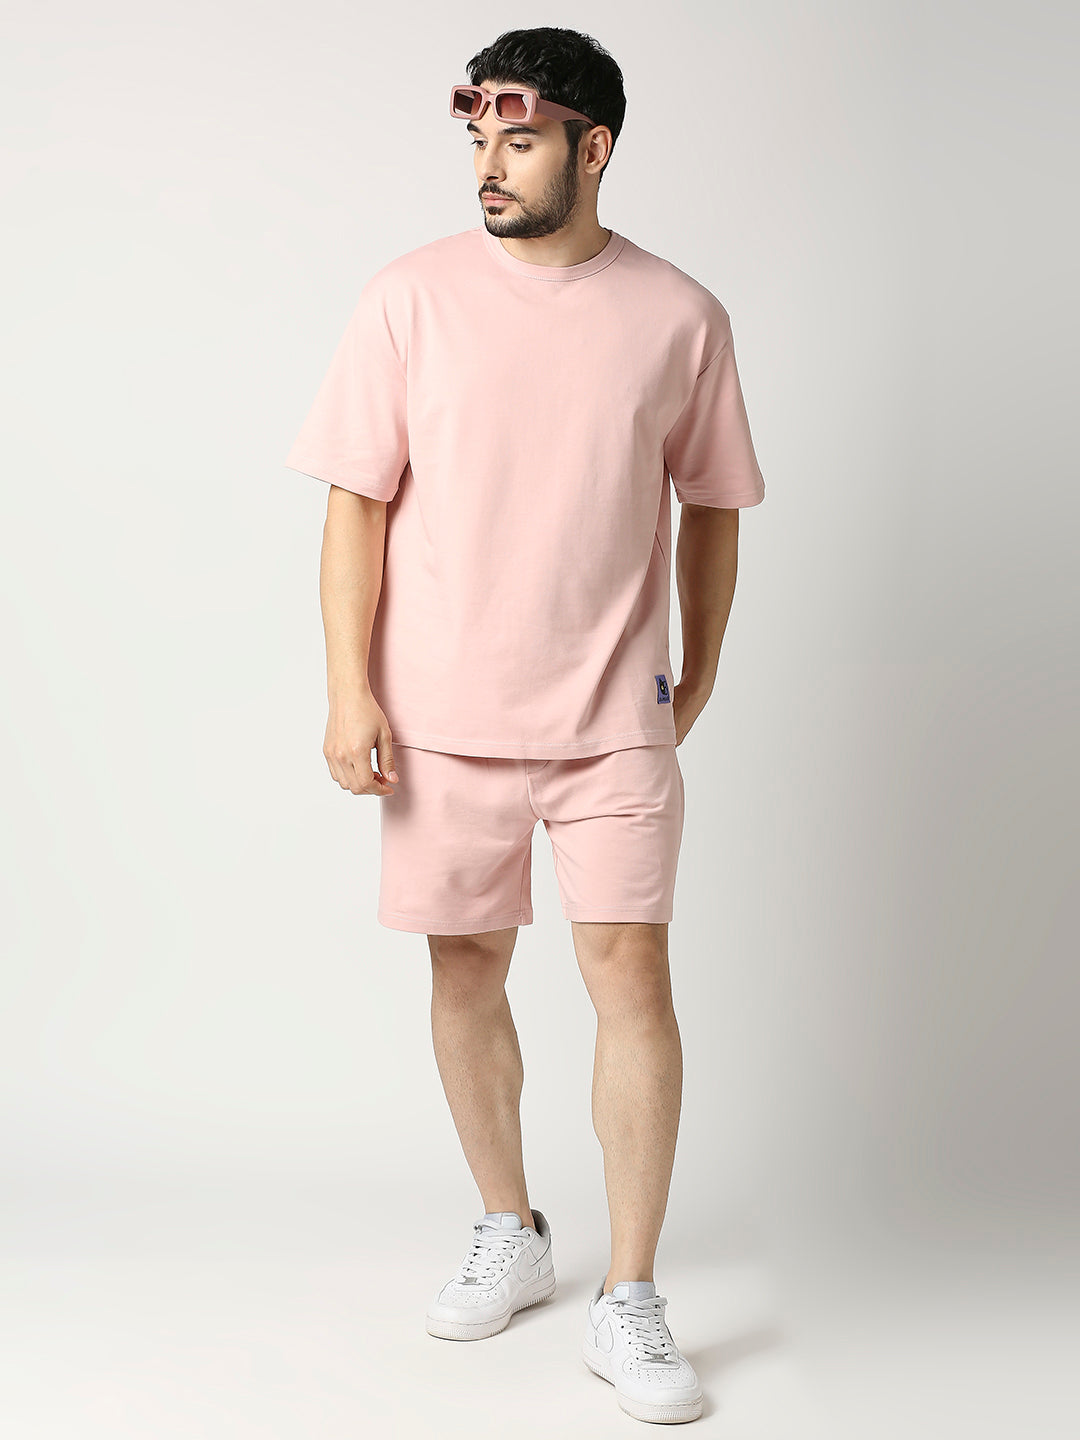 Buy Blamblack Solid Pink Co-ord Set with short.